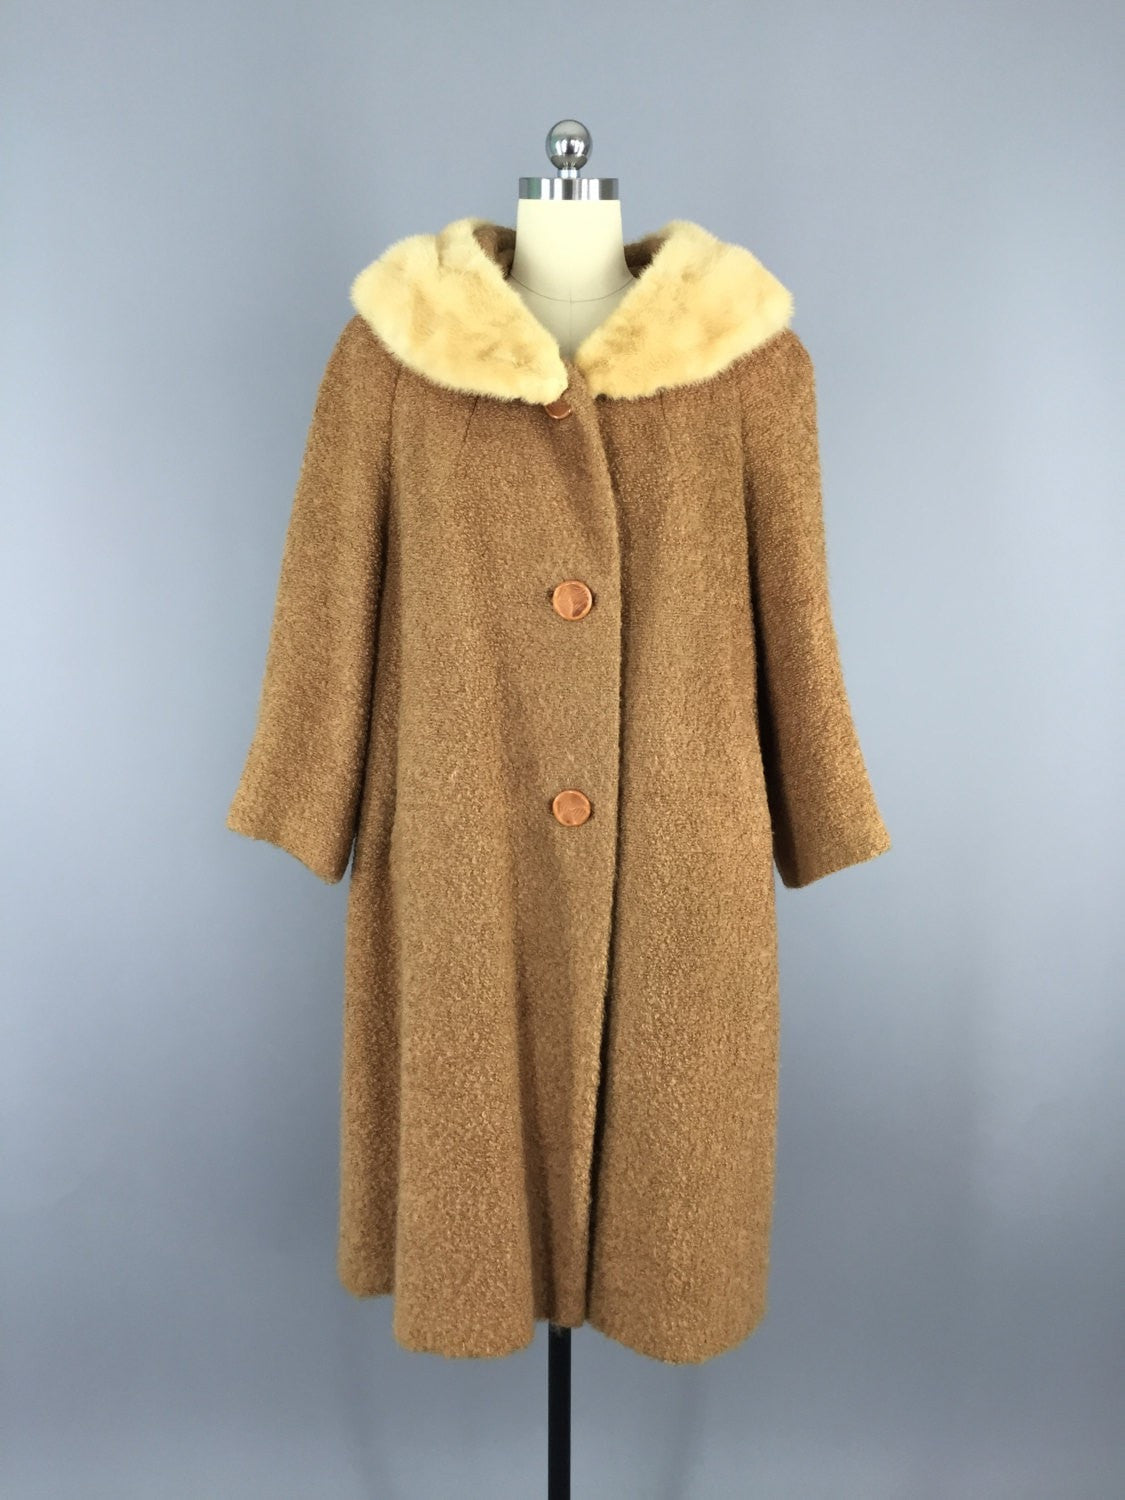 Vintage 1960s Coat / Camel Brown with Blonde Mink Fur Collar - ThisBlueBird